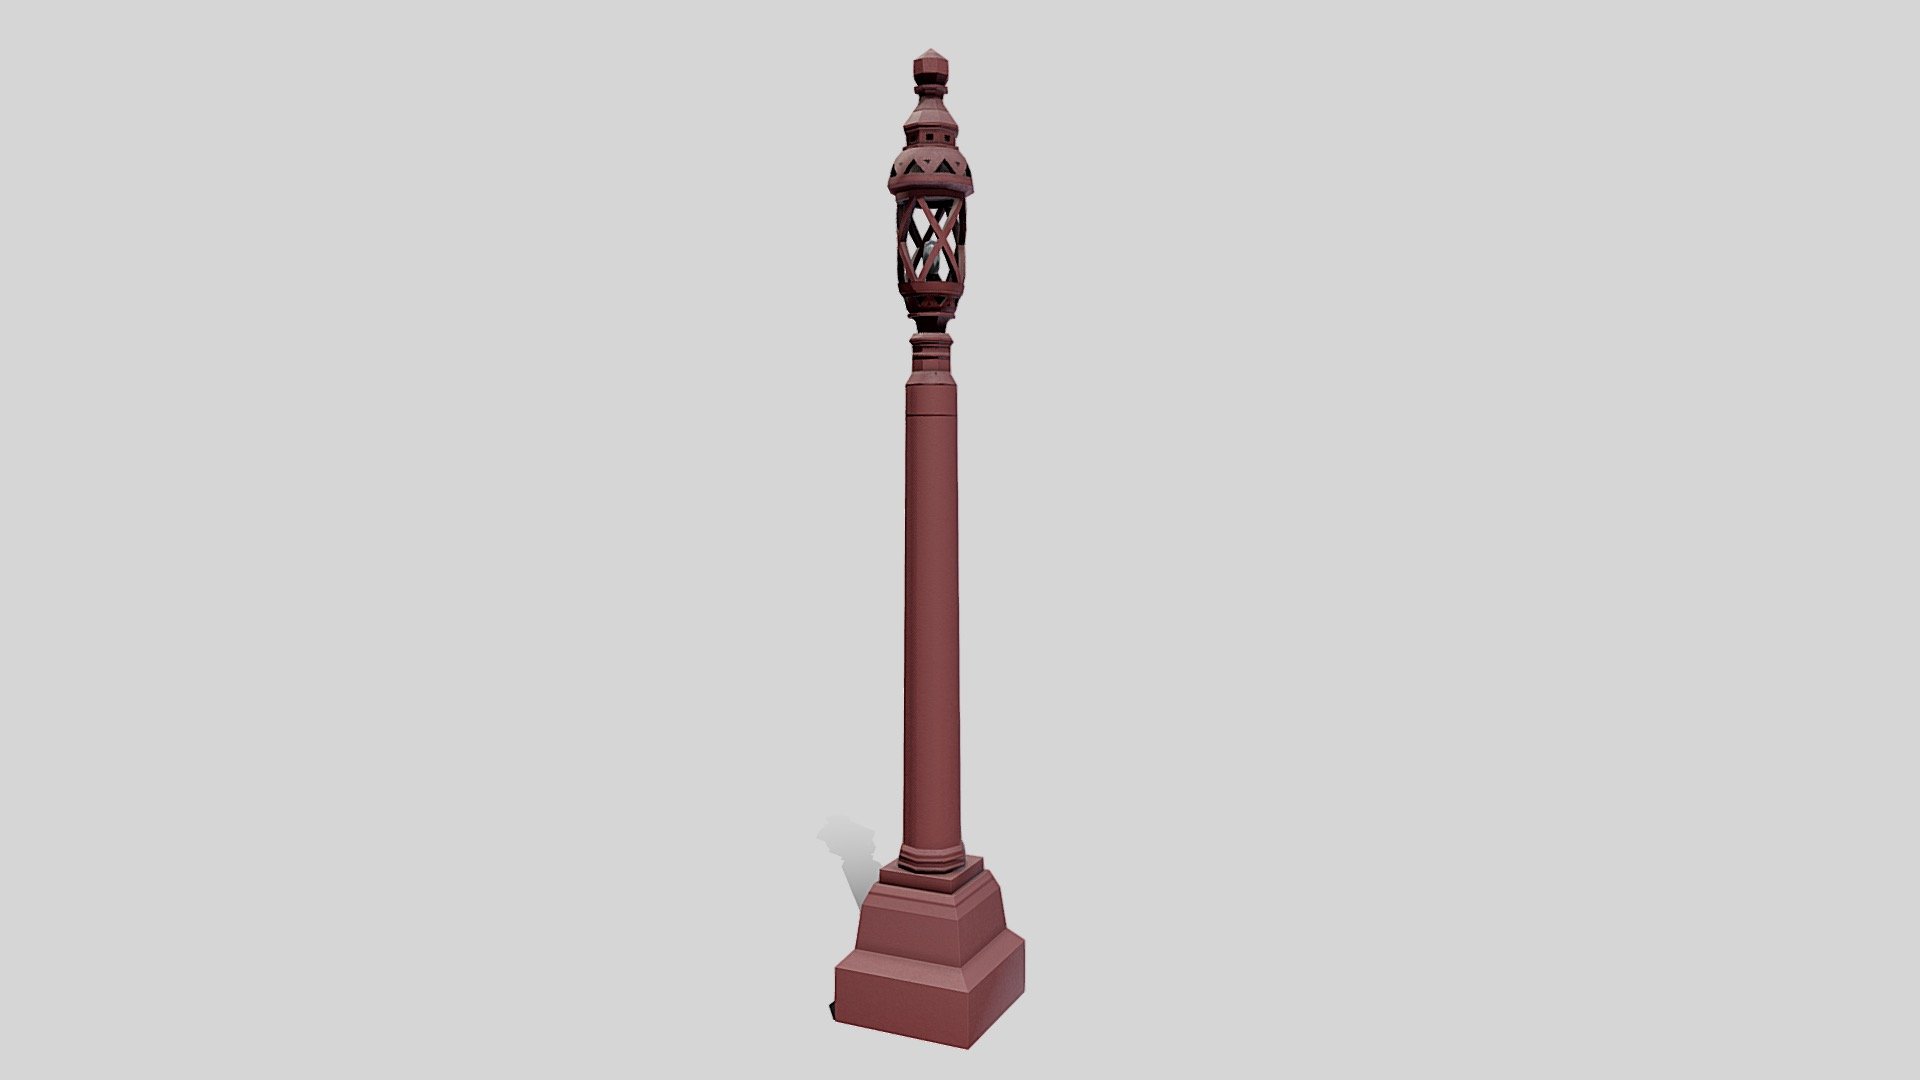 An ornate street lamp found decorating the India Gate Canopy, New Delhi, India.

The textures have been created in Substance Painter and Designer specifcally for this model to give it a high quality, realistic look 3d model